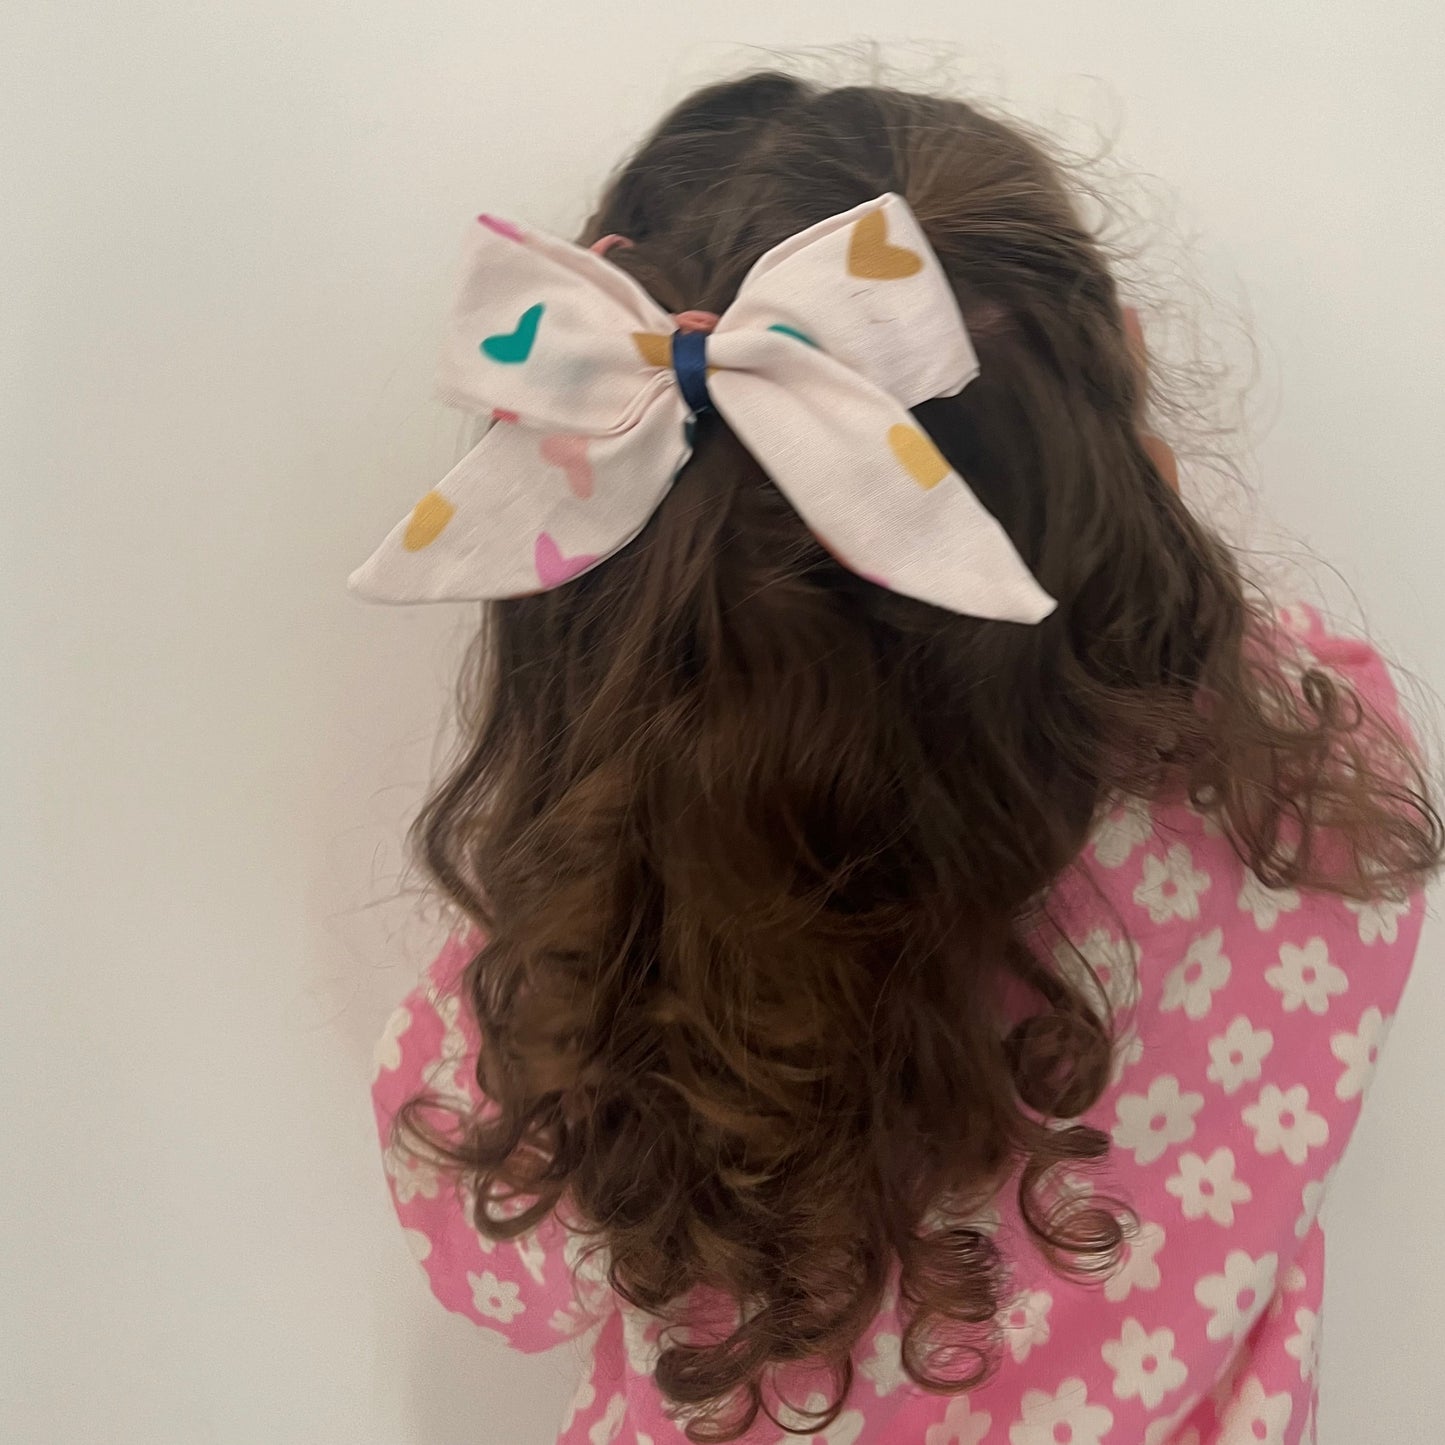 Little Bow - Heart Bow | 1 Large Clip